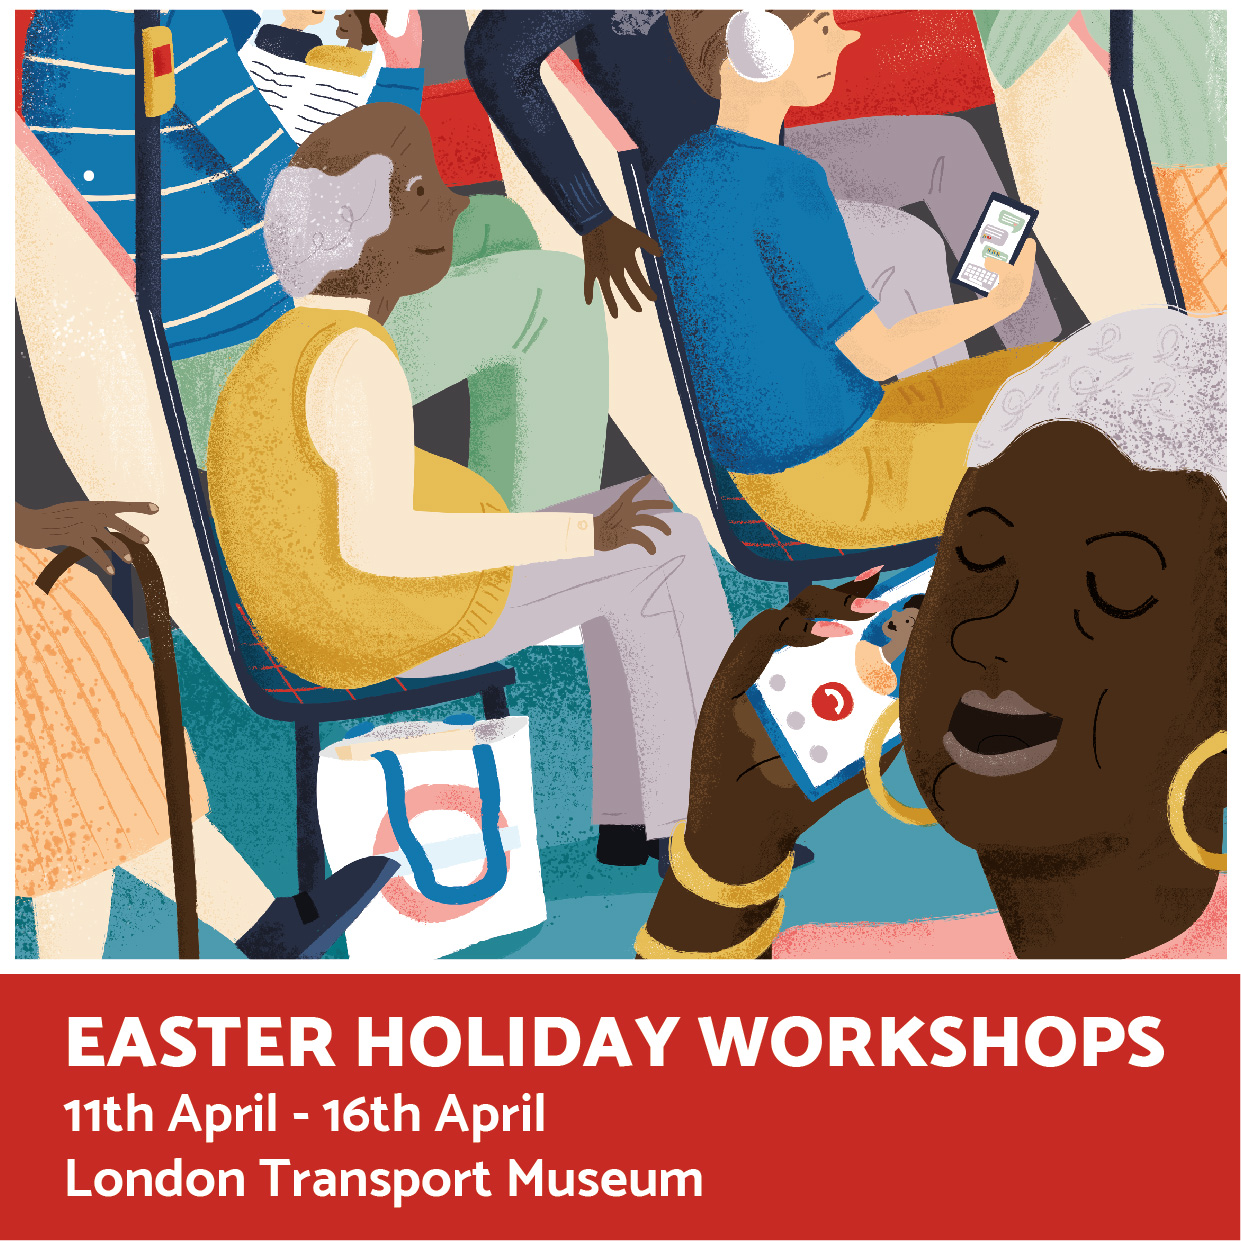 Illustration workshops run by Elly Jahnz at the London Transport Museum